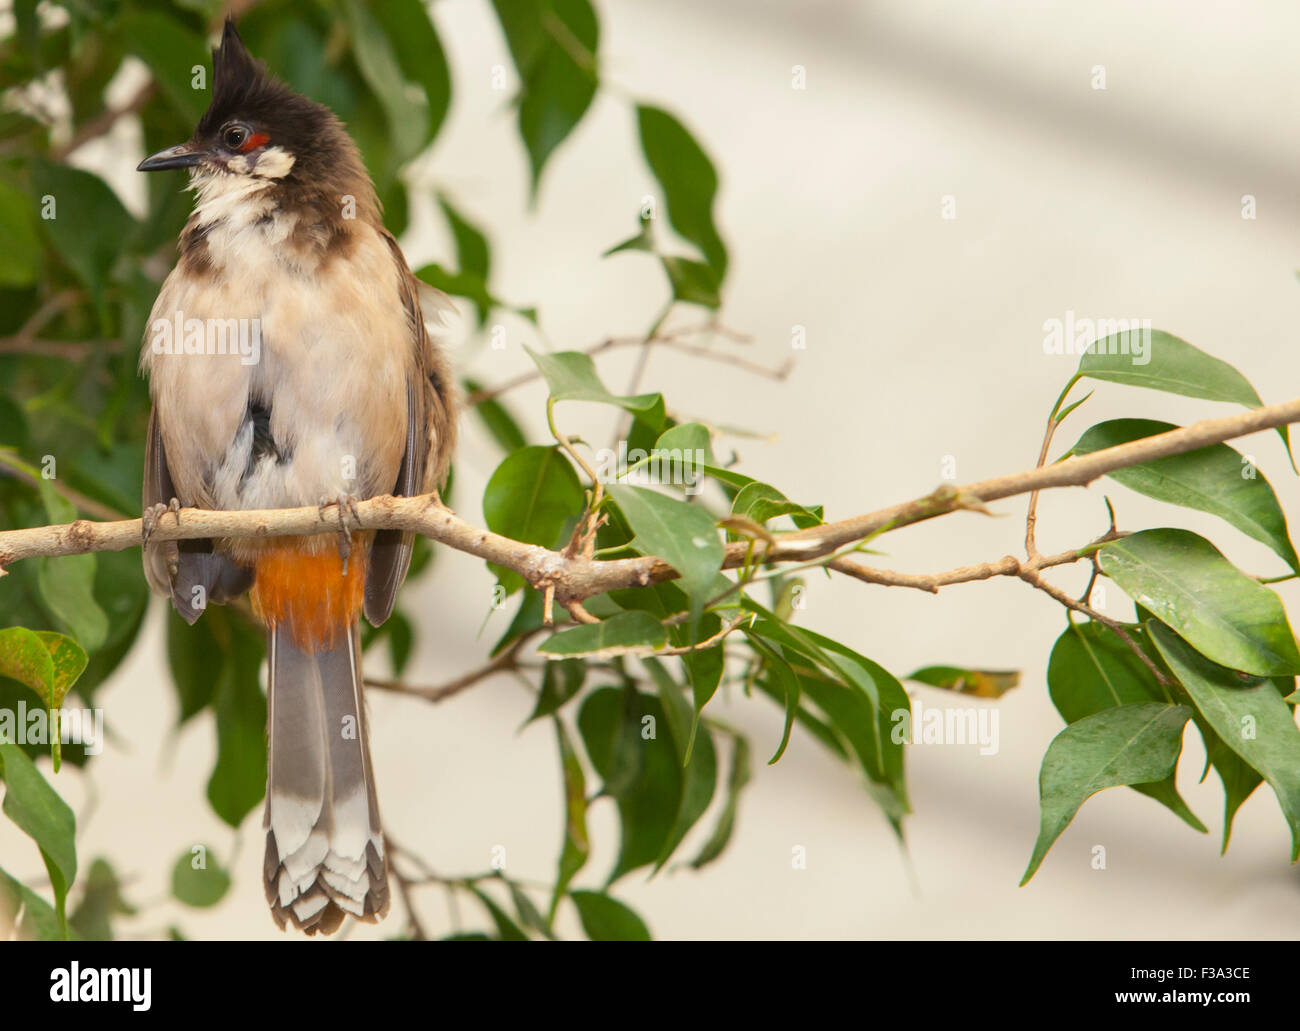 Tropical bird red-whiskered bulbul or pycnonotus jocosus sitting on a tree branch Stock Photo